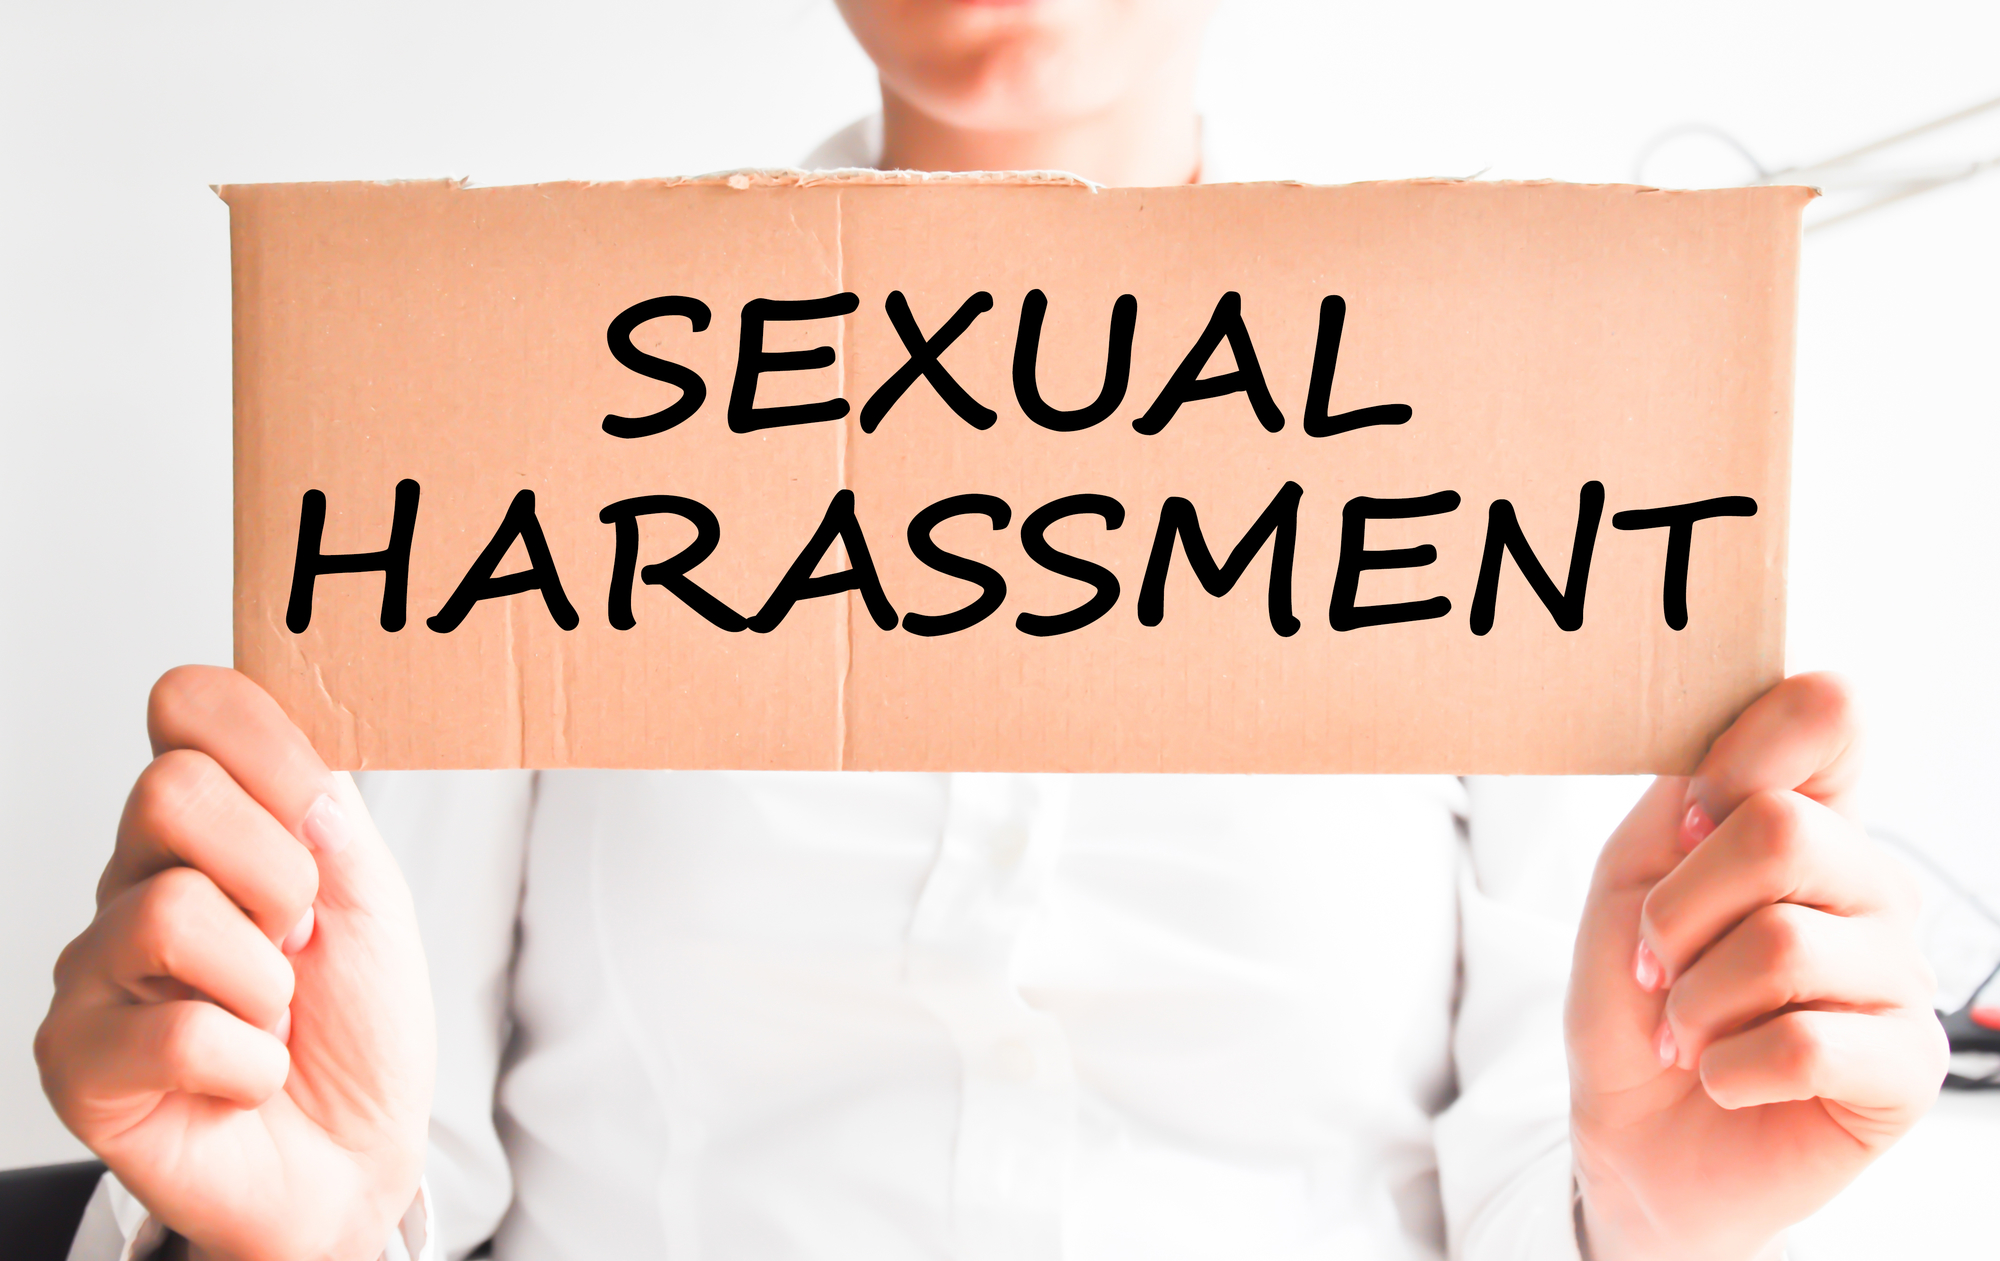 Sexual Harassment Relationship Therapy And Relationship Advice For